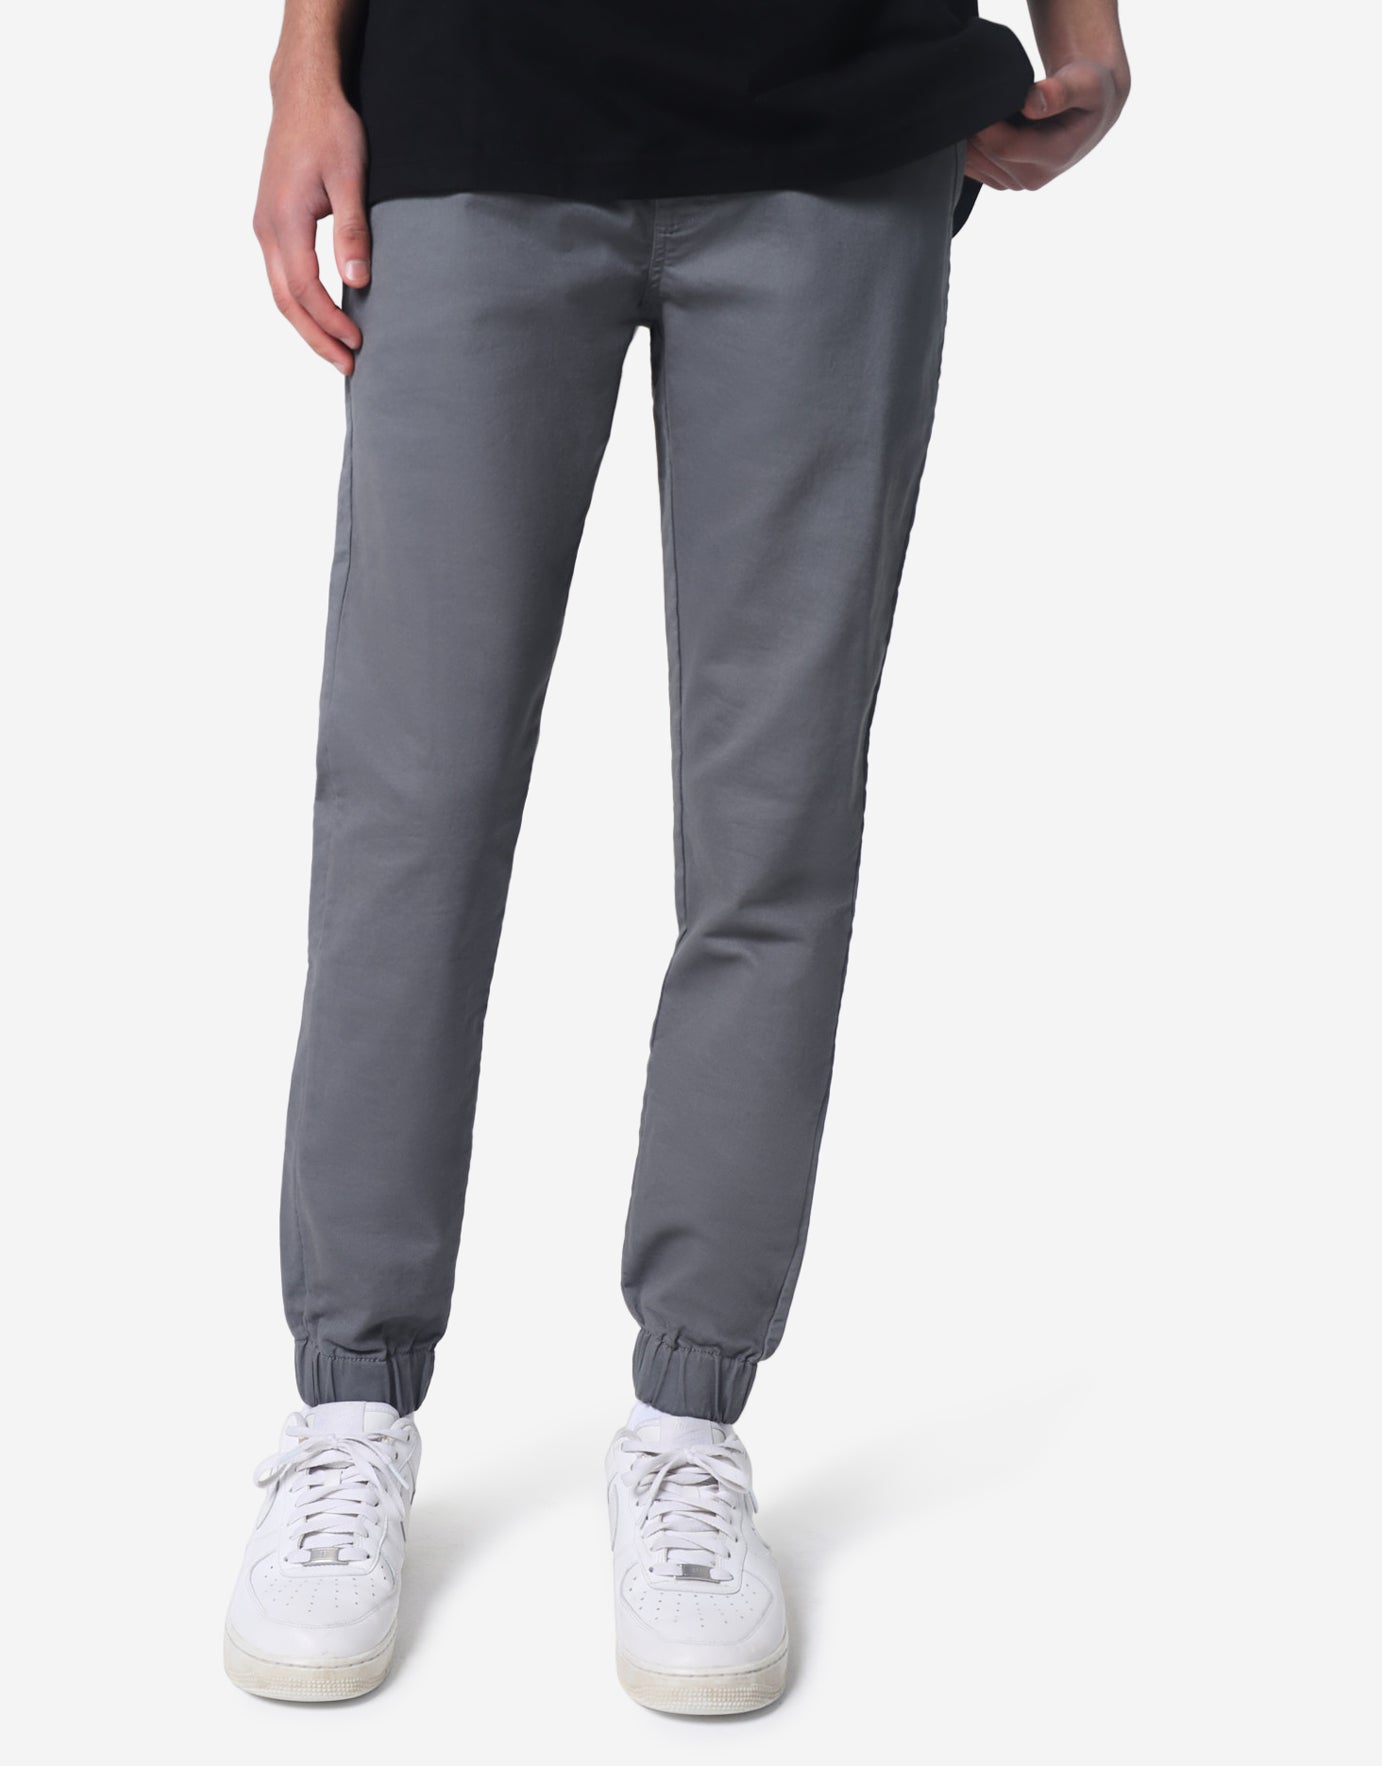 GASP -A classic pair of tapered joggers – the GASP way.